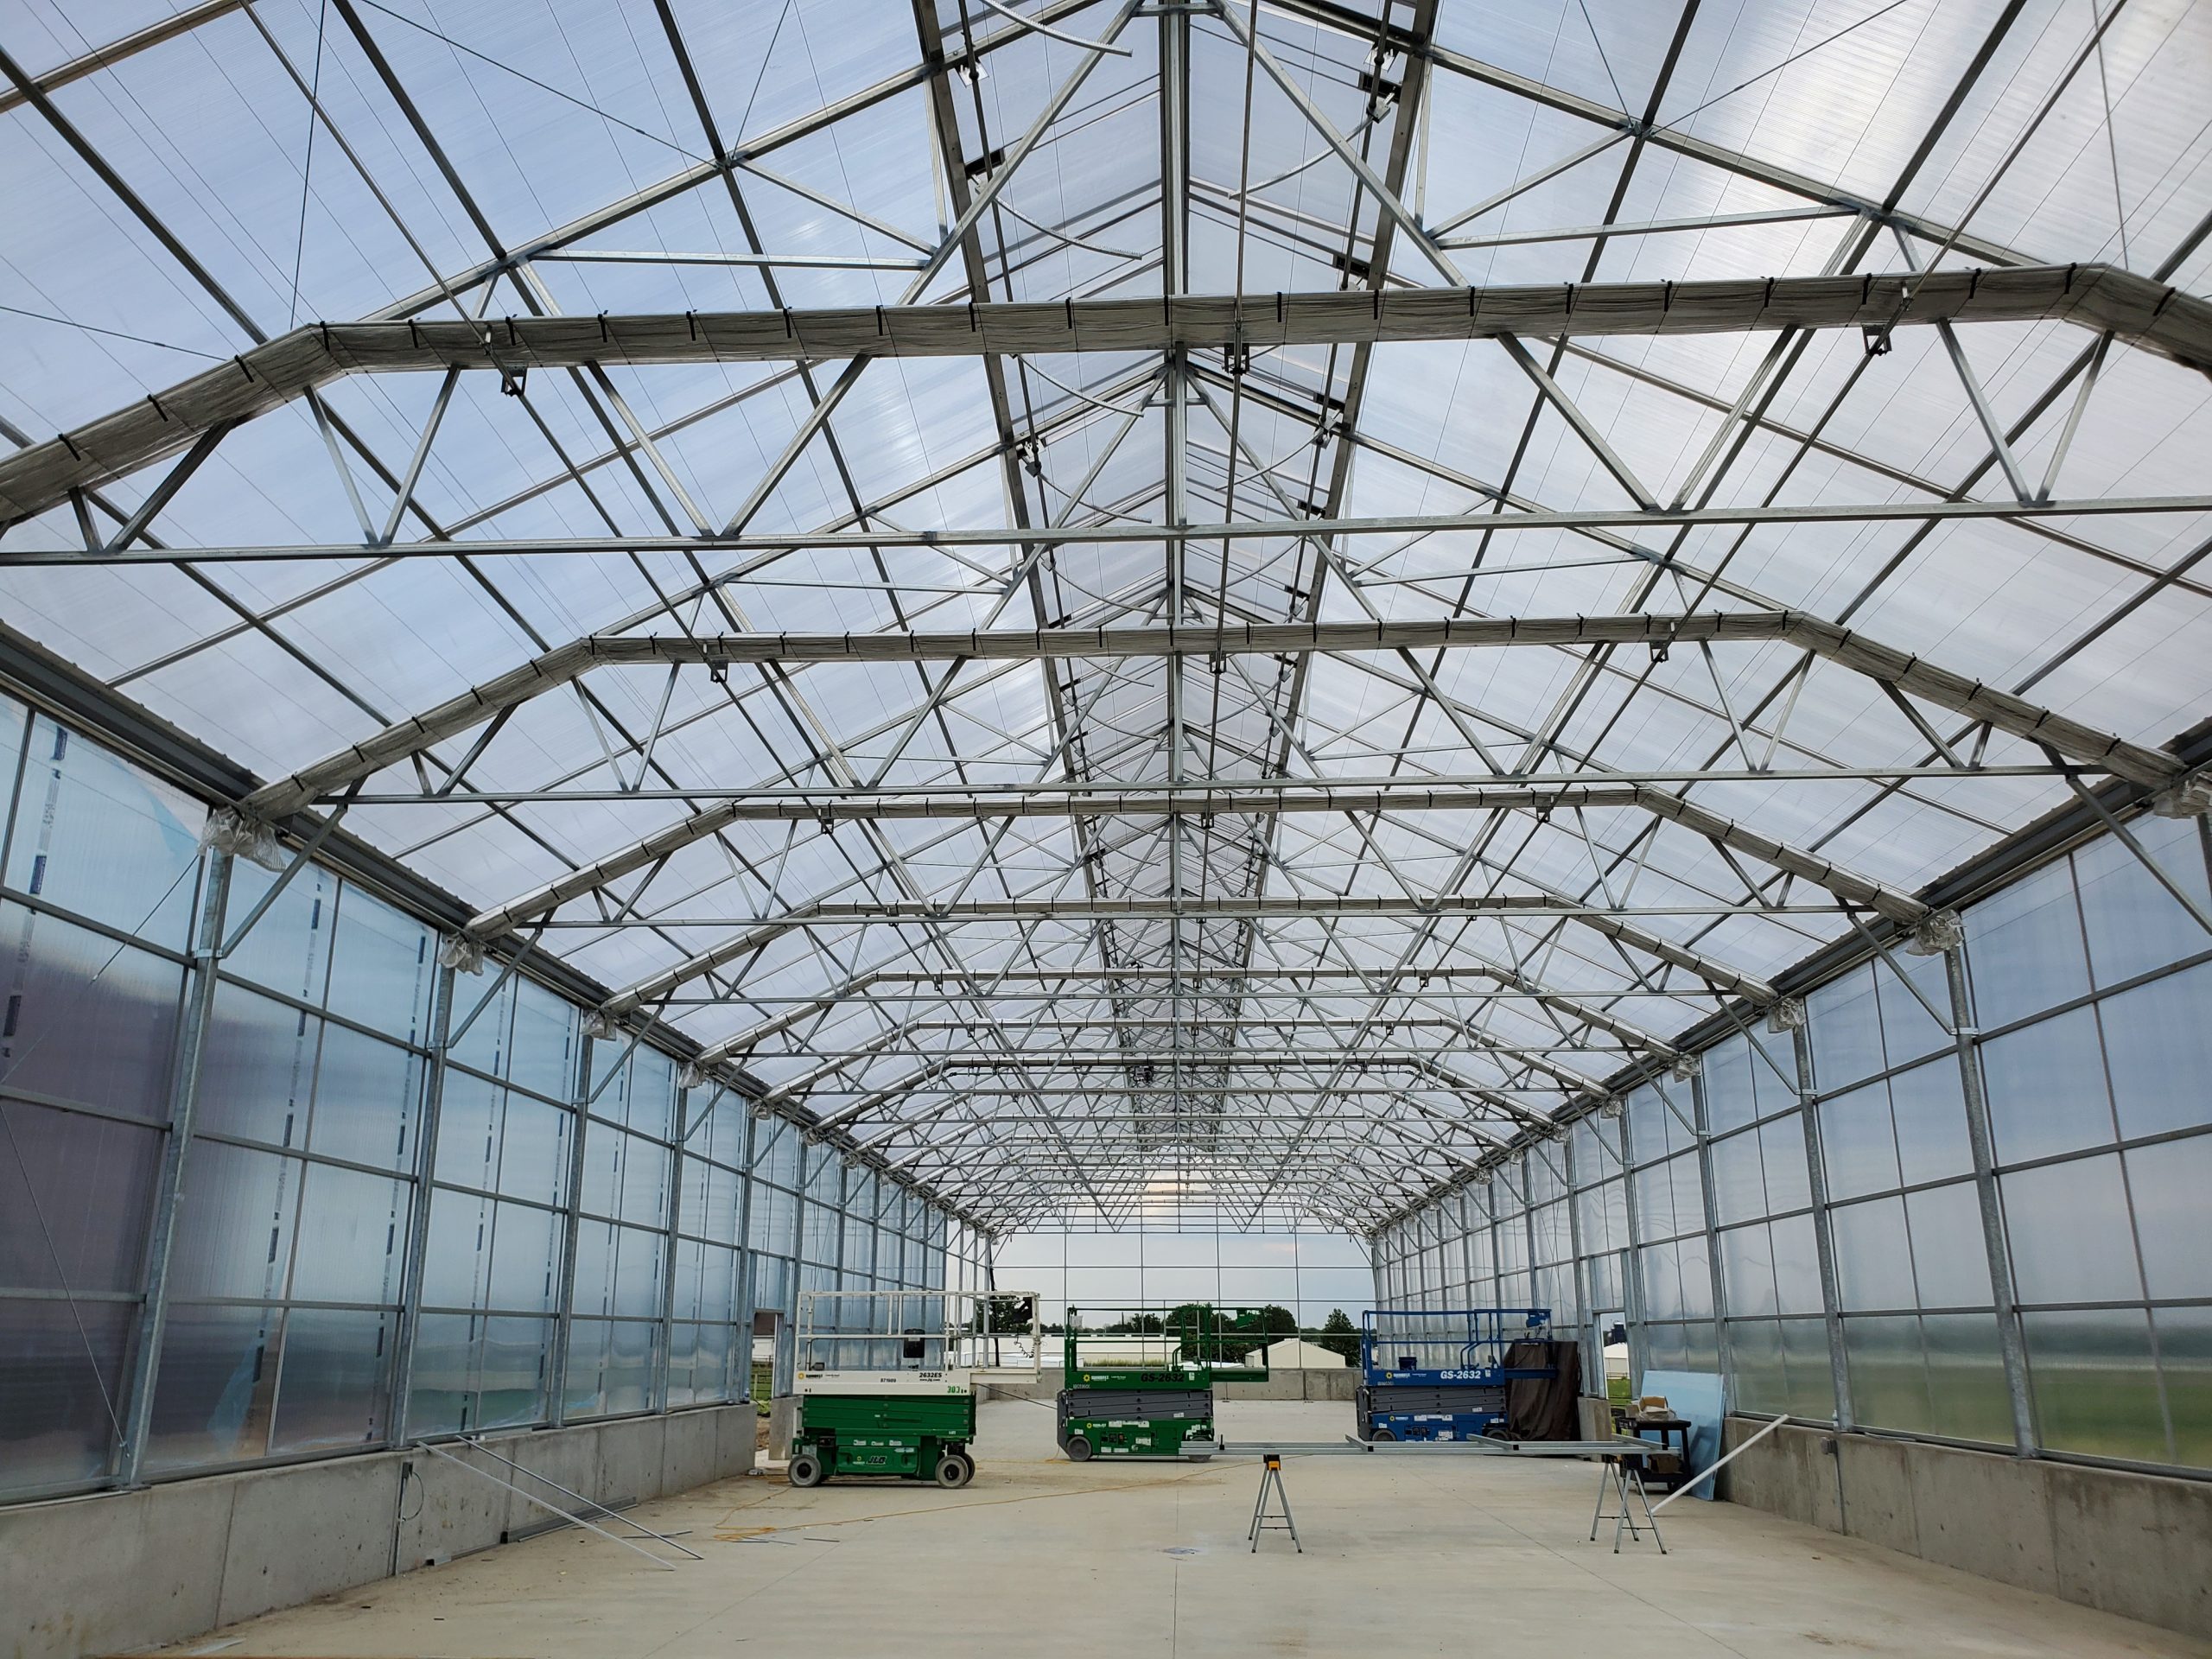 Inside View of Greenhouse